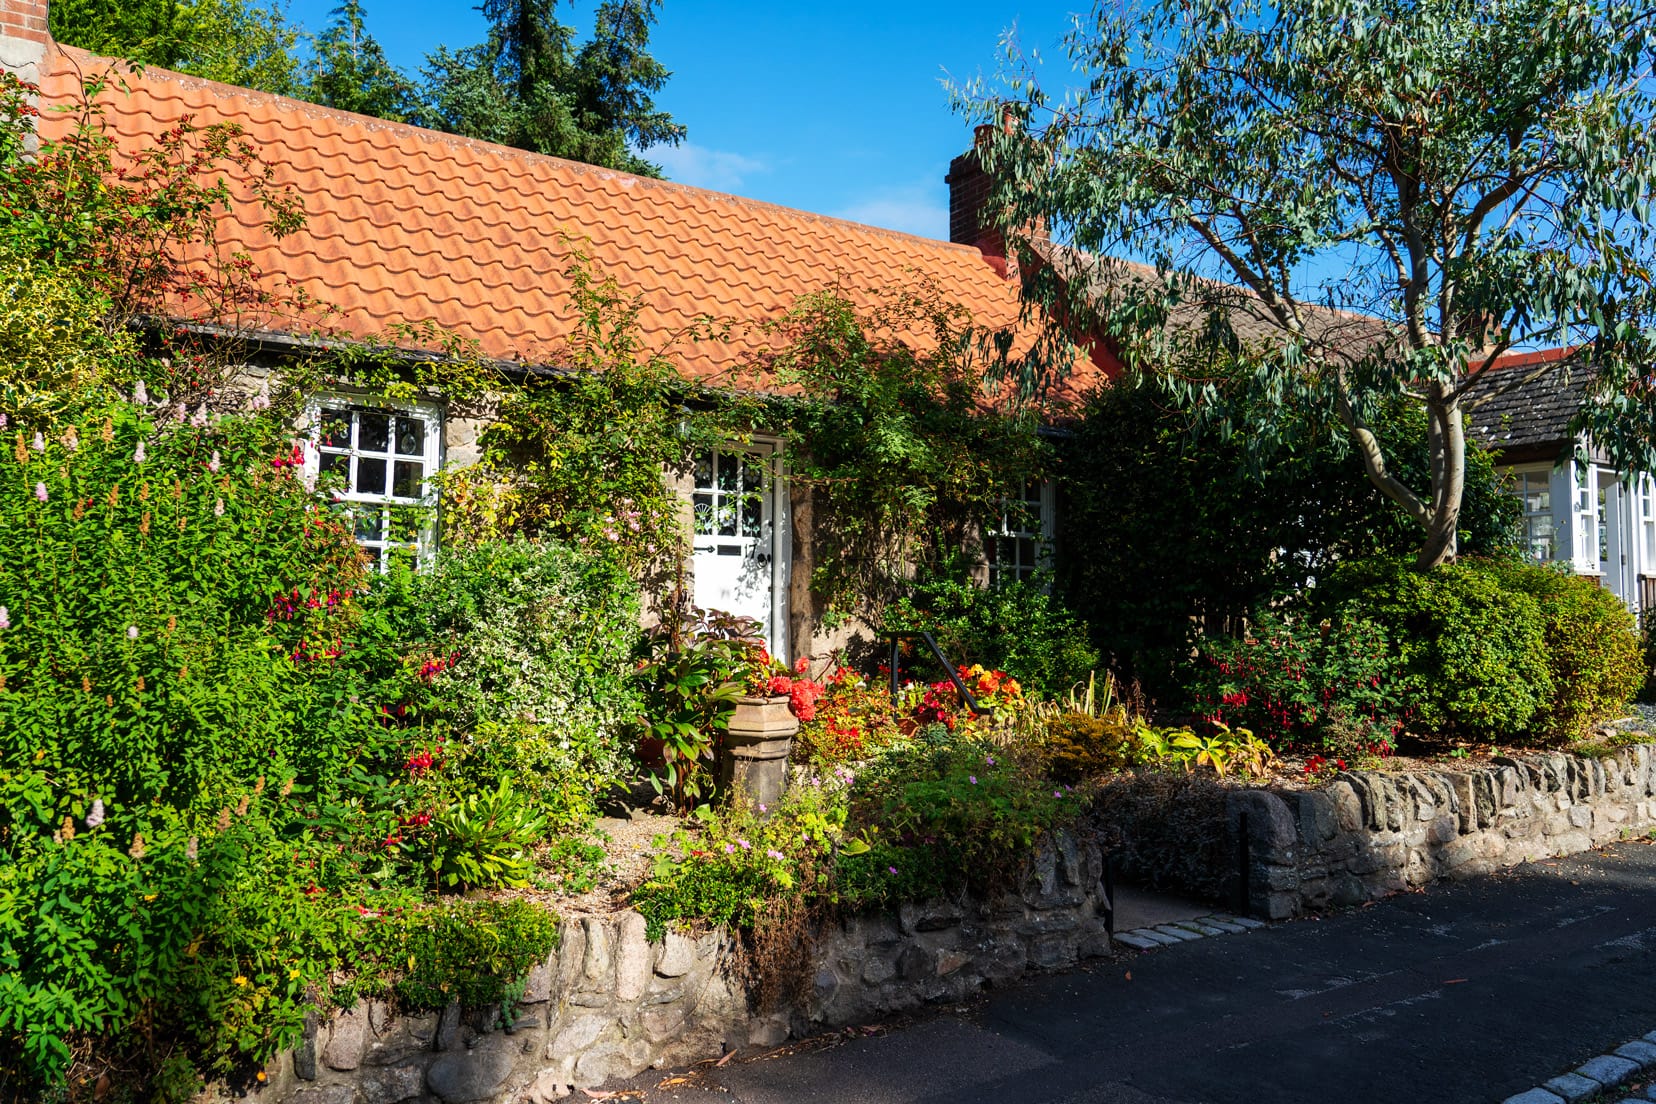 Things-to-do-in-Aberdeen---Cottown-house with climbing flowery plants growing around the cottage